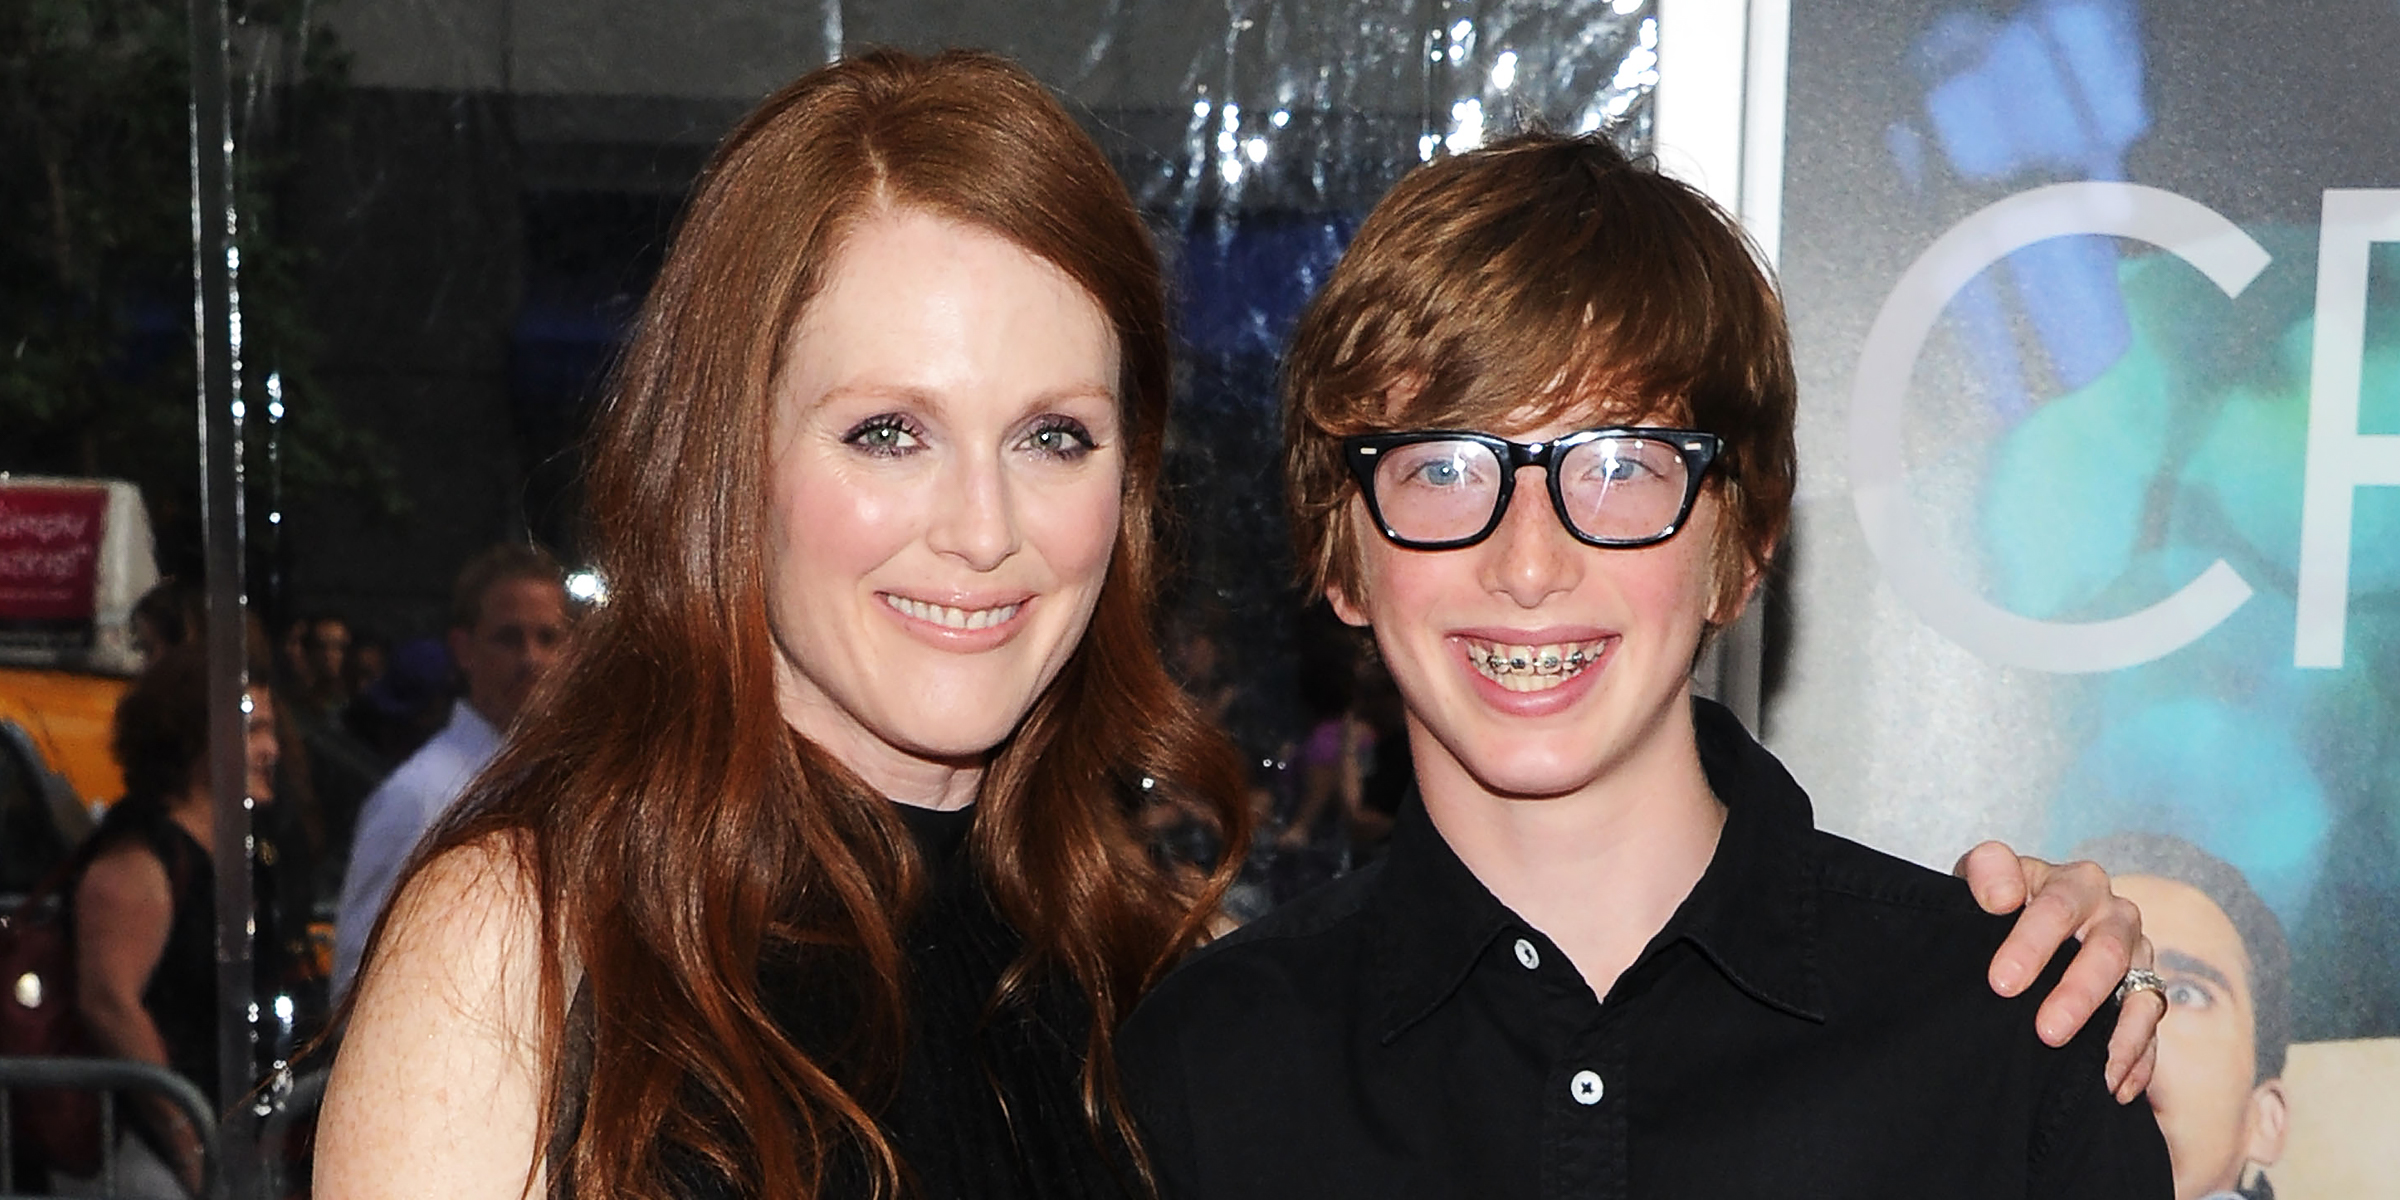 Julianne Moore and Caleb Freundlich, 2011 | Source: Getty Images